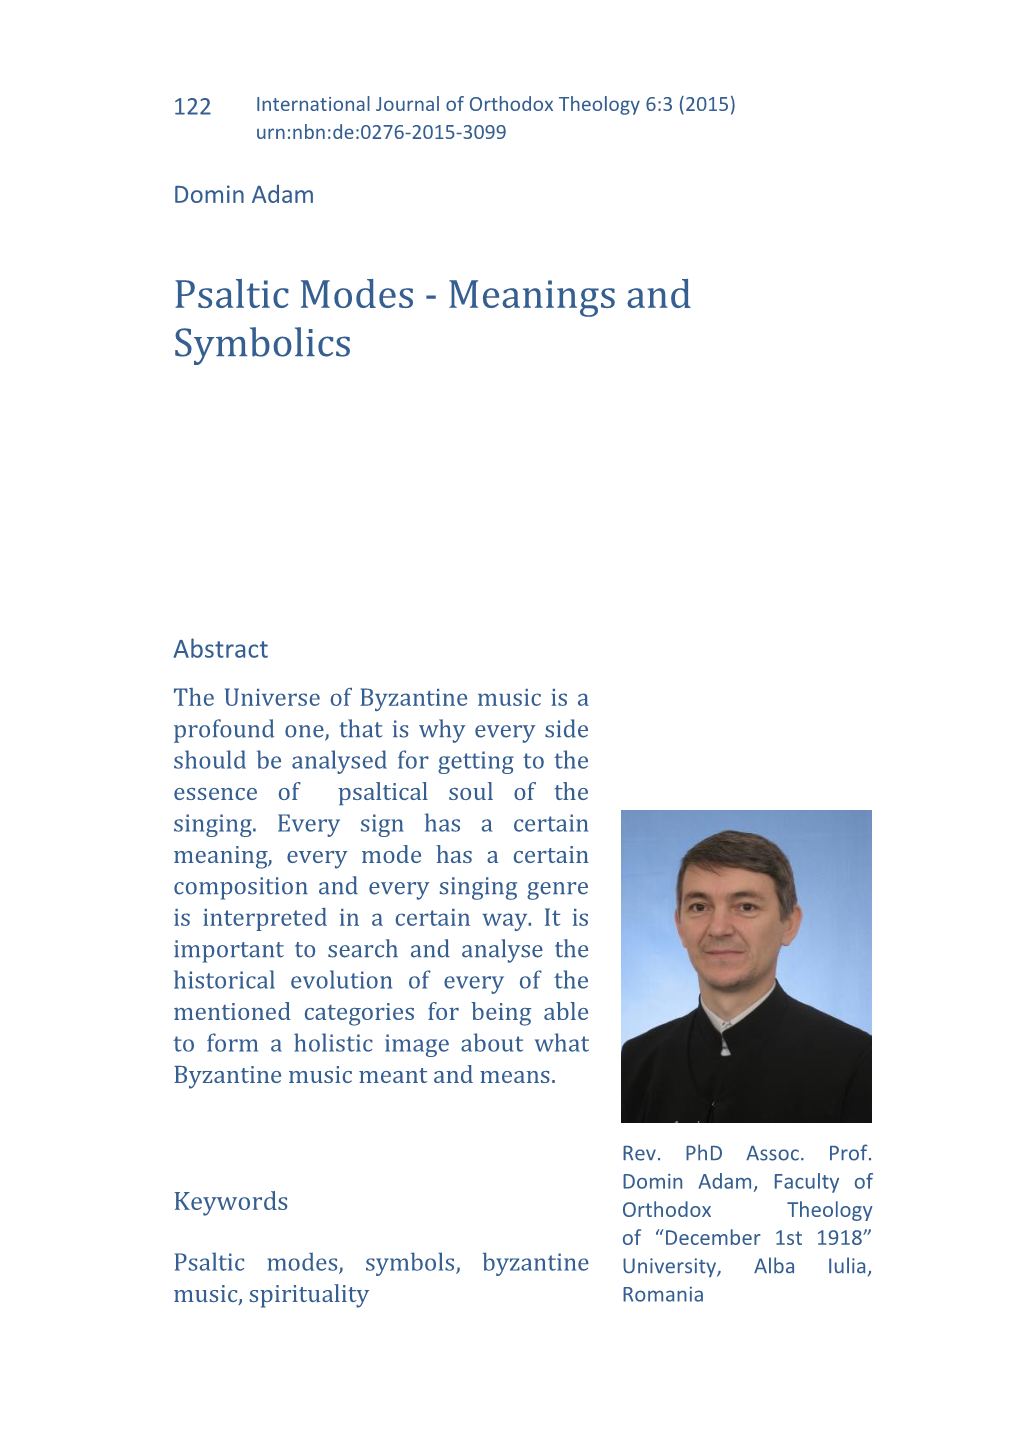 Psaltic Modes - Meanings and Symbolics